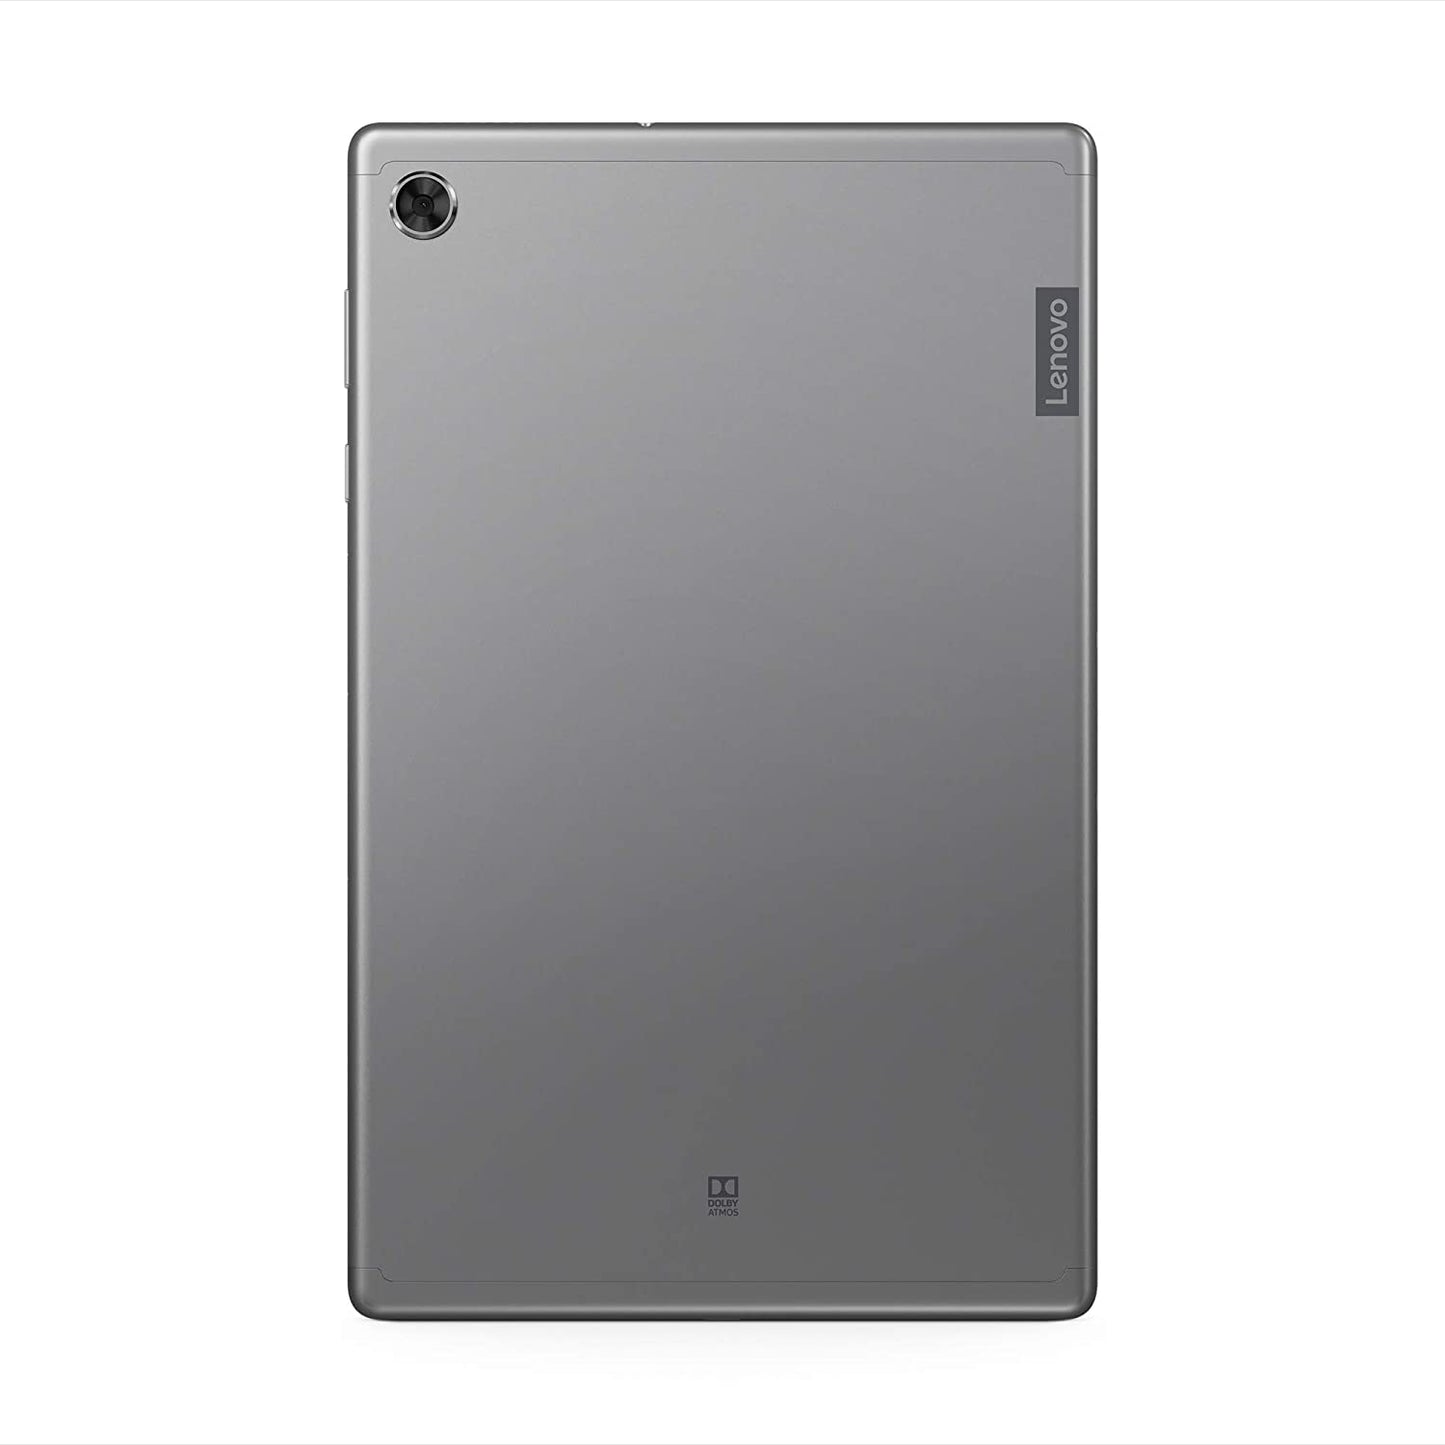 Lenovo Smart Tab M10 FHD Plus Tablet 2GB RAM 32GB Storage 2.3Ghz Octa Core with Android 10, 10.3" Display, Face Unlock, 8MP Camera (Iron Grey)